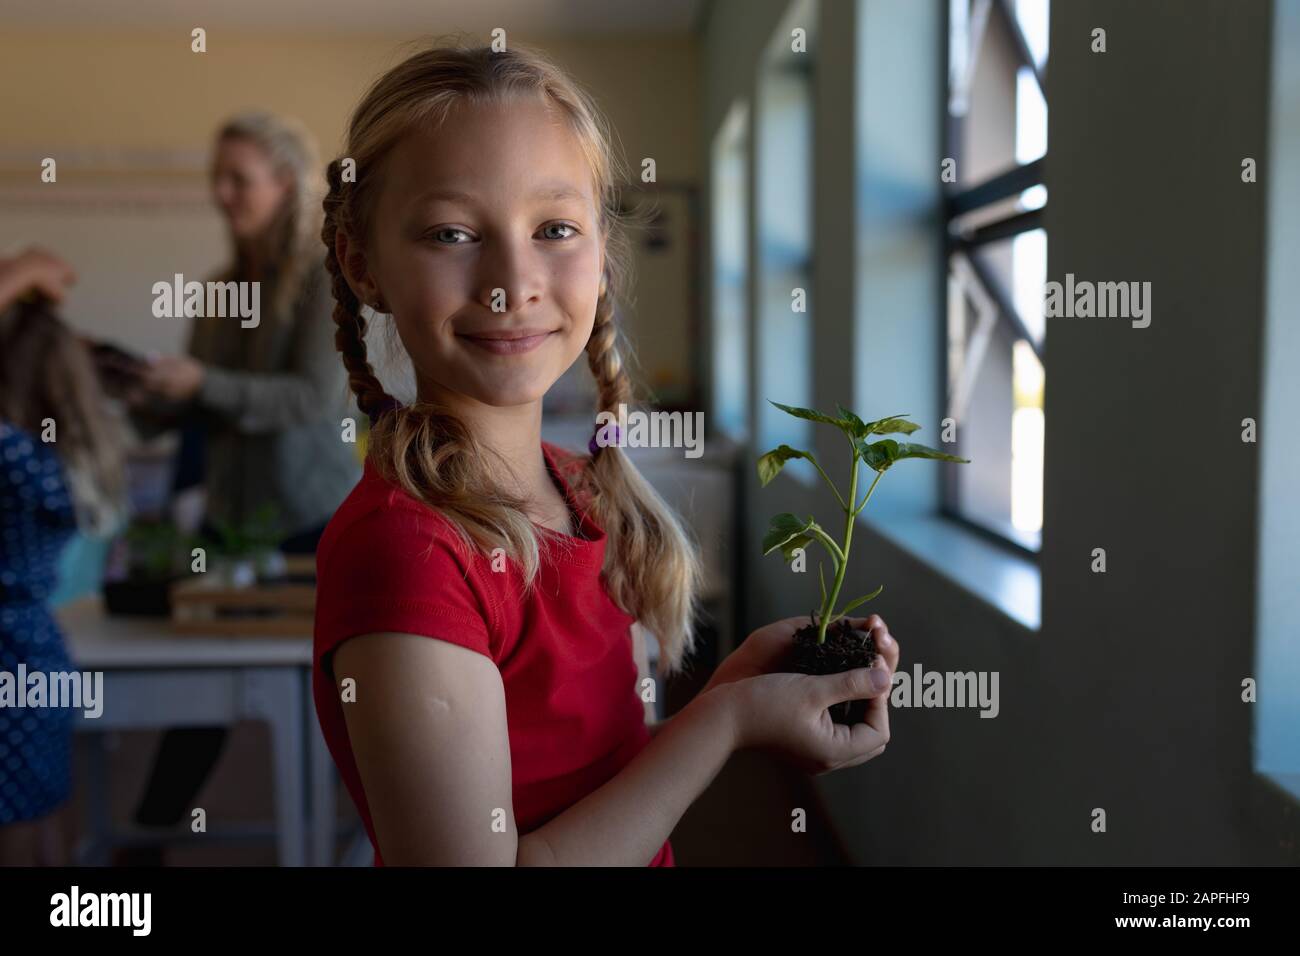 Schoolgirl standing holding a seedling plant in earth in an elementary school classroom Stock Photo